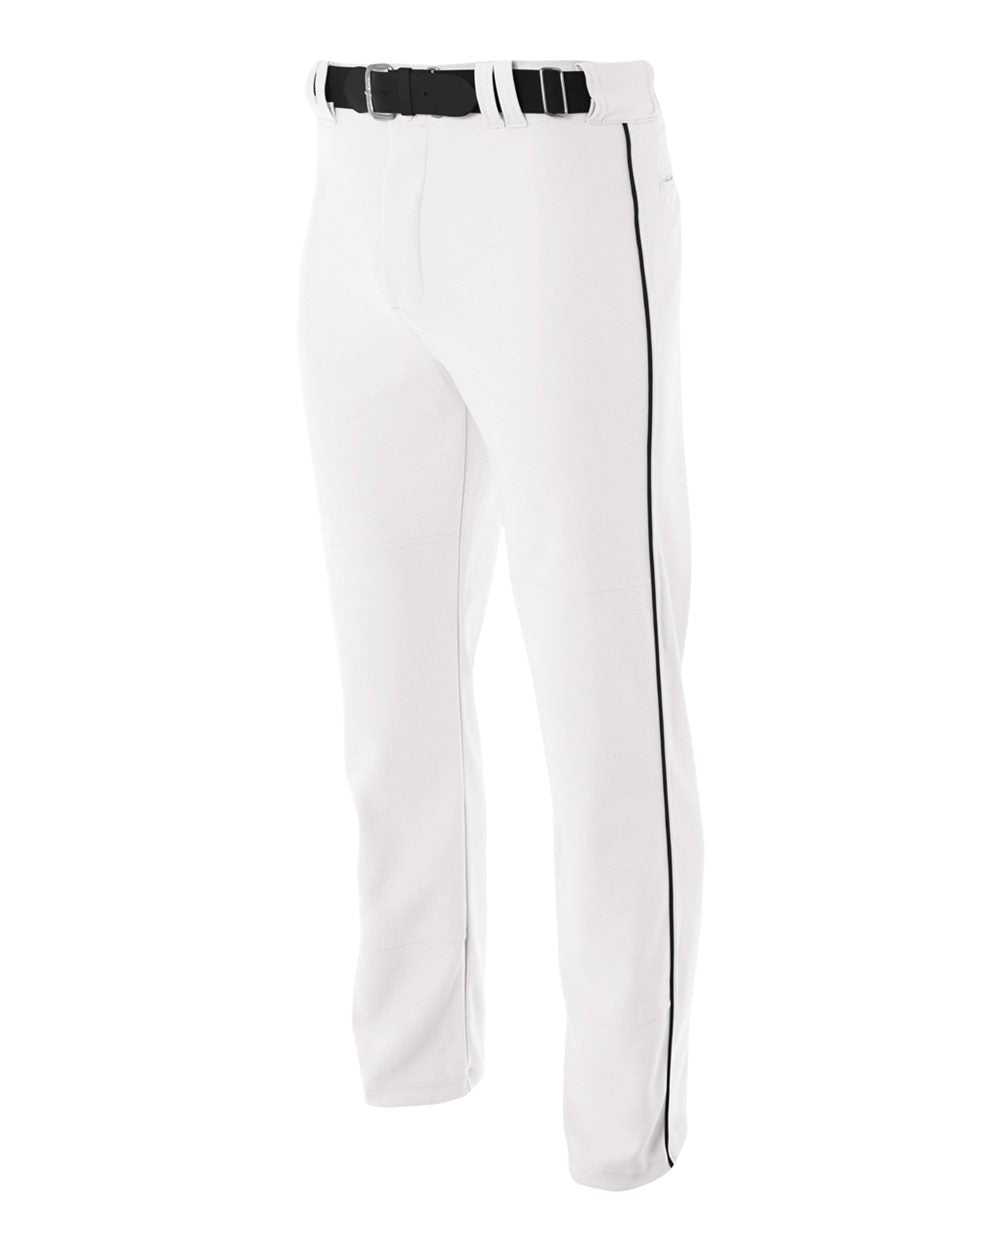 A4 NB6162 Youth Pro Style Open Bottom Baggy Cut Baseball Pant - White Black - HIT a Double